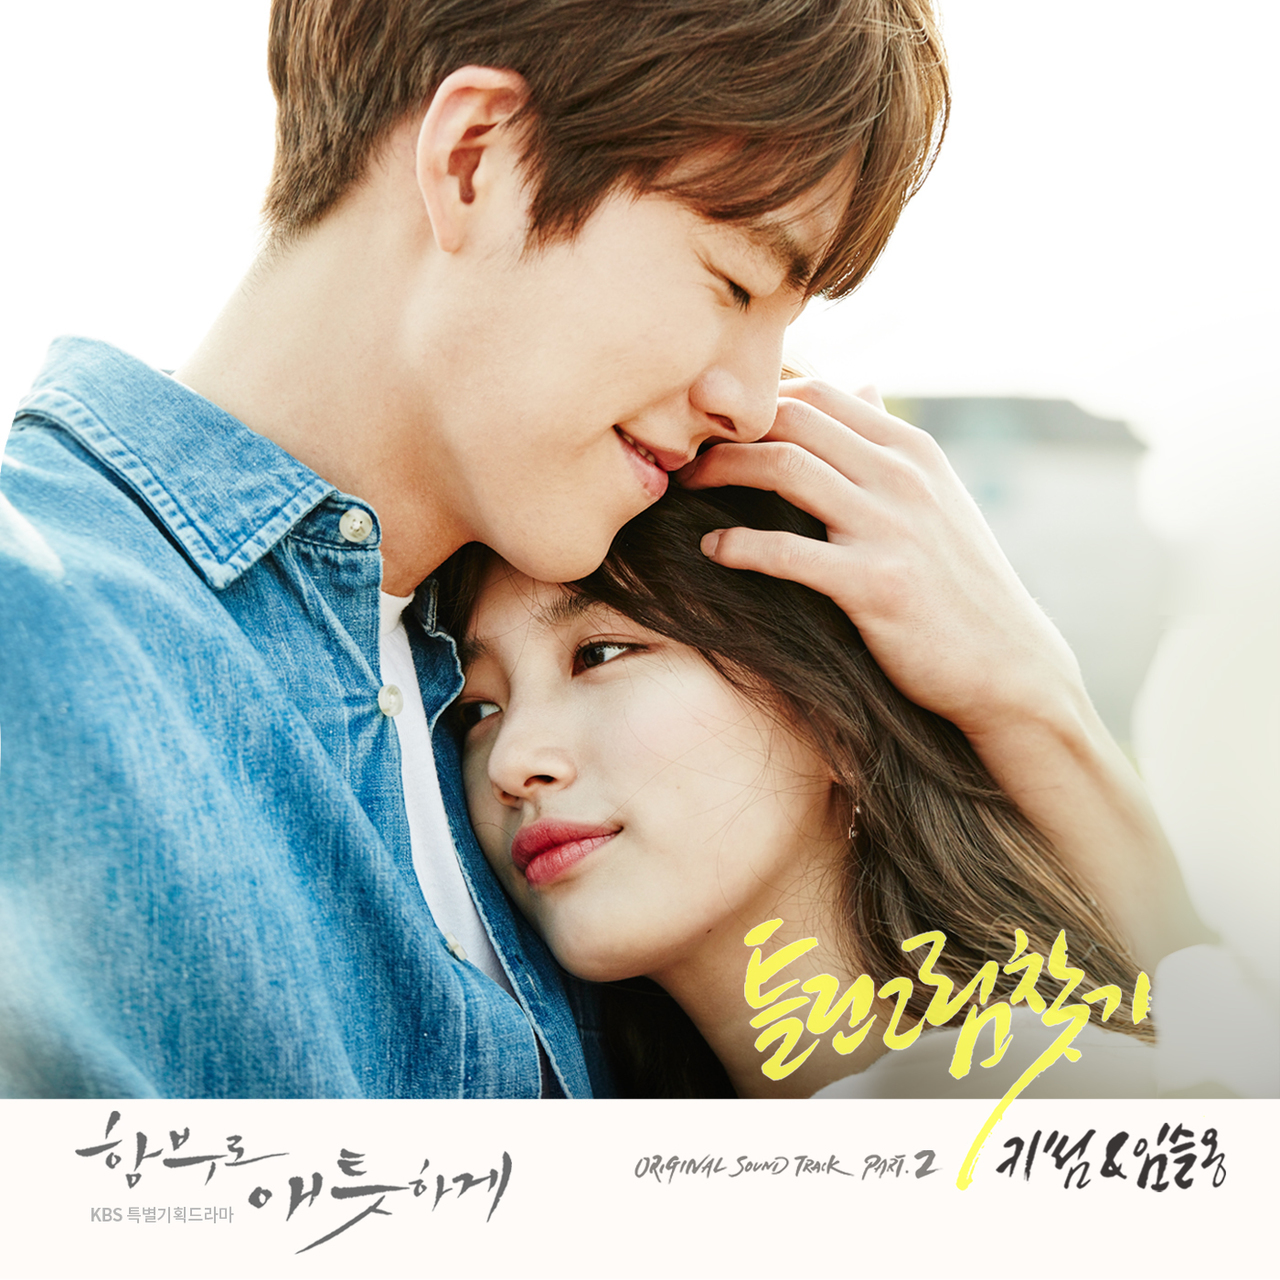 image about Uncontrollably Fond. See more about